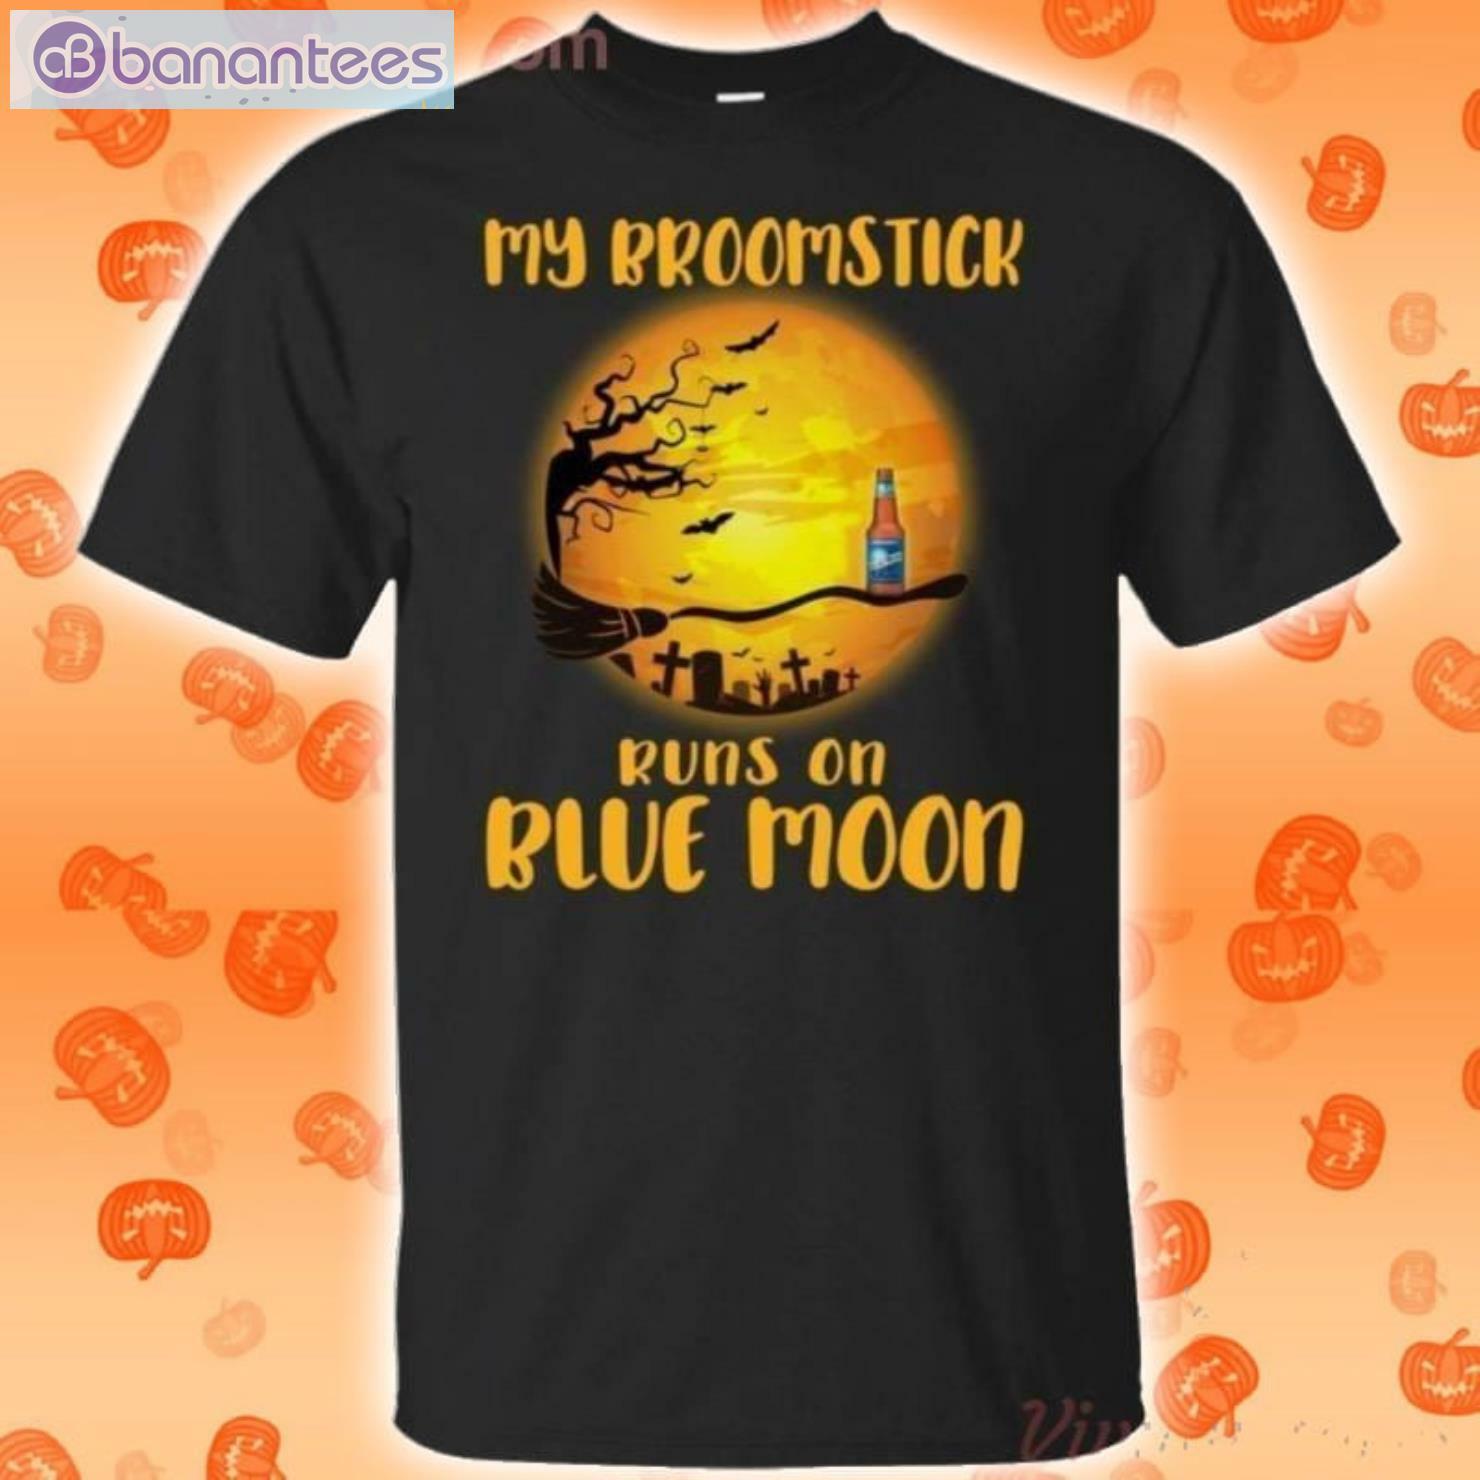 My Broomstick Runs On Blue Moon Funny Beer Halloween T-Shirt Product Photo 1 Product photo 1